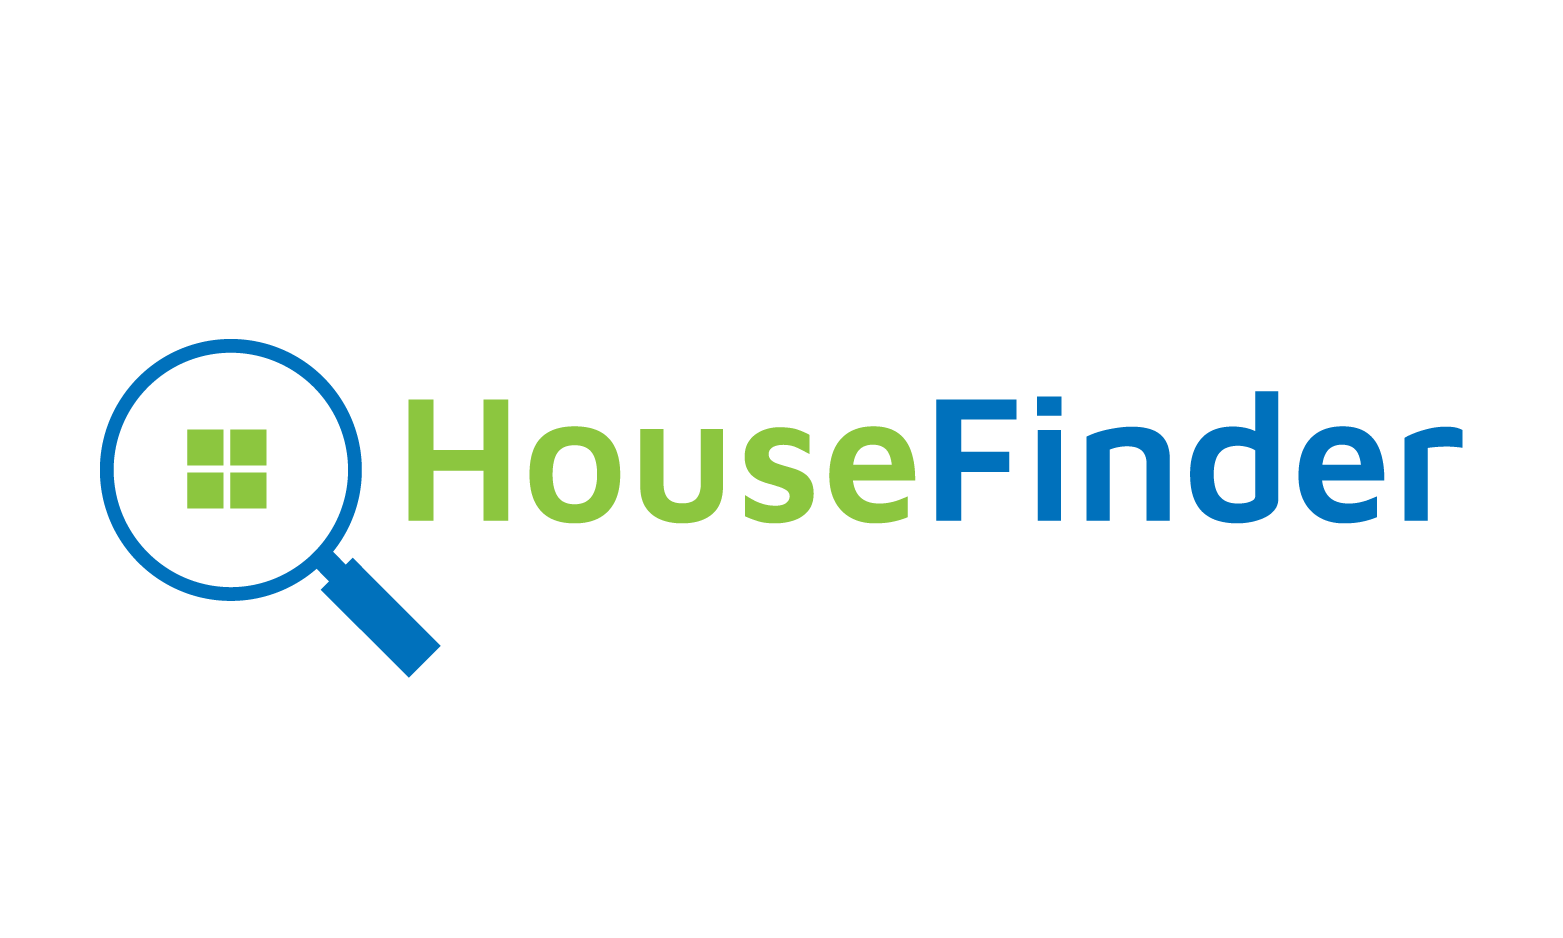 HouseFinder.net is for sale